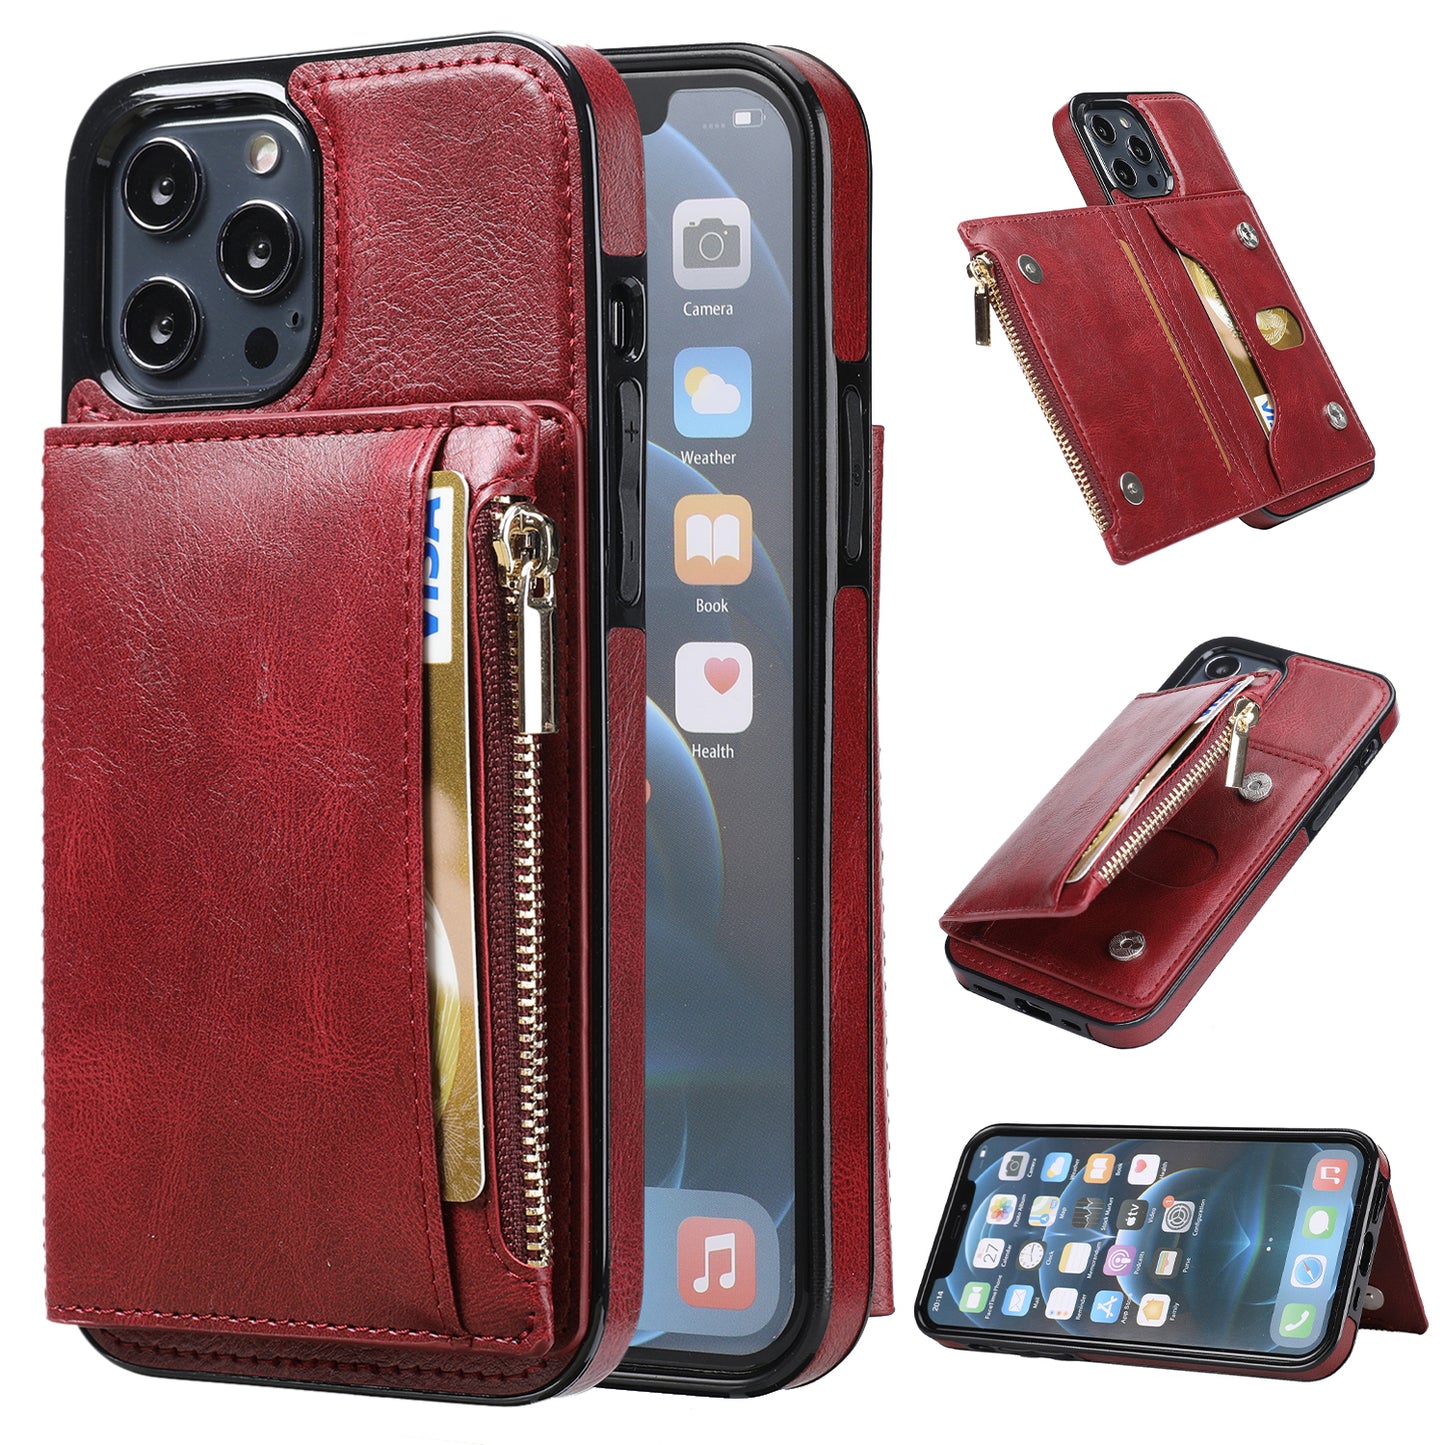 Apple iPhone 12 Pro Max Leather Cover Multifuntional Wallet External Card Holder Kickstand TPU Zipper